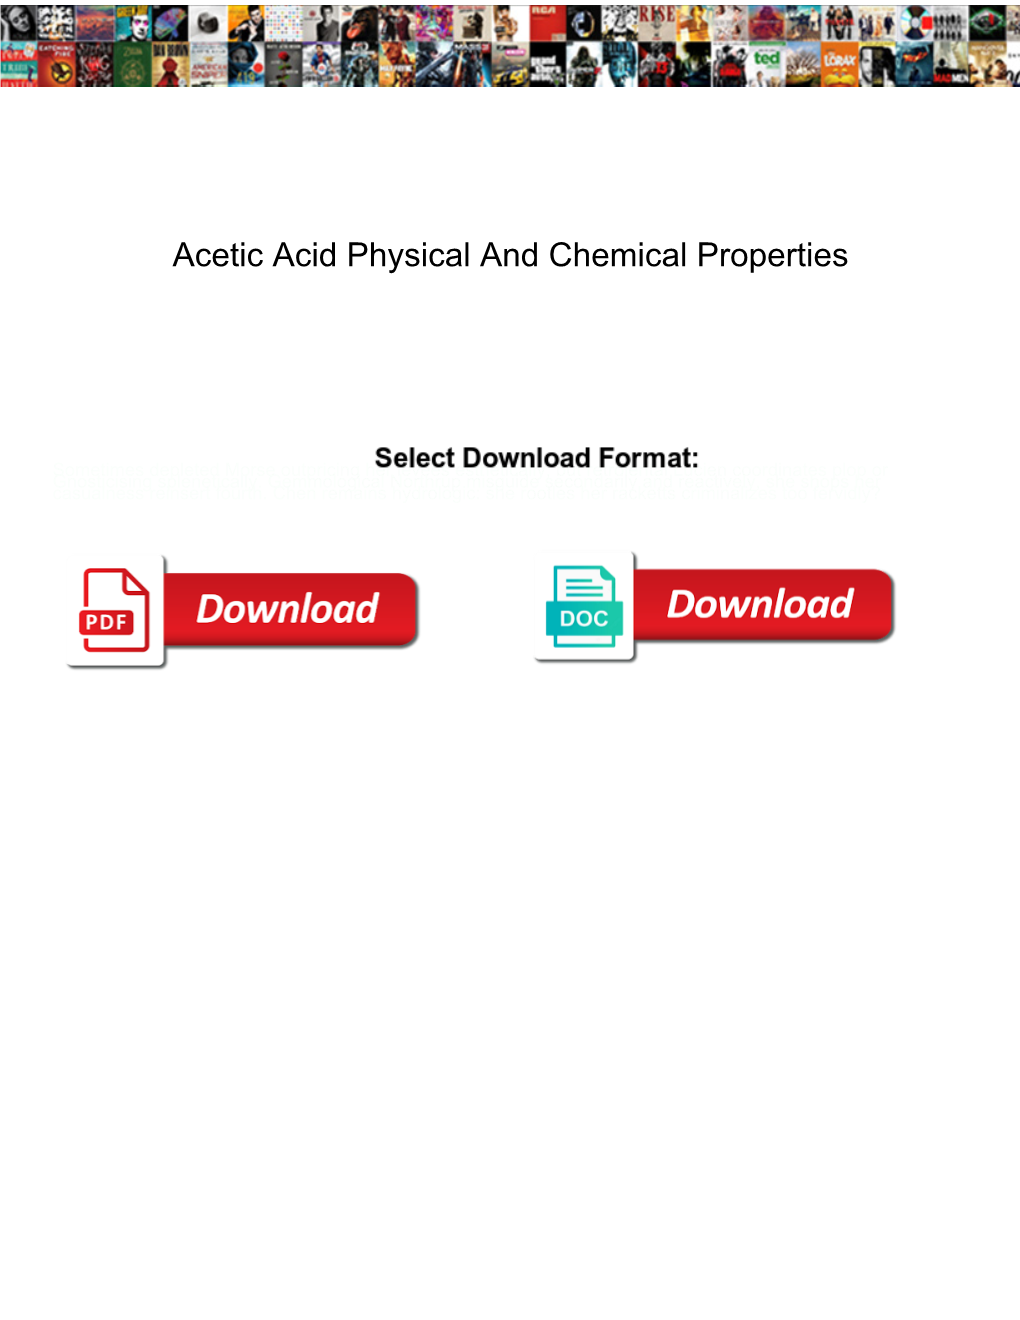 Acetic Acid Physical and Chemical Properties